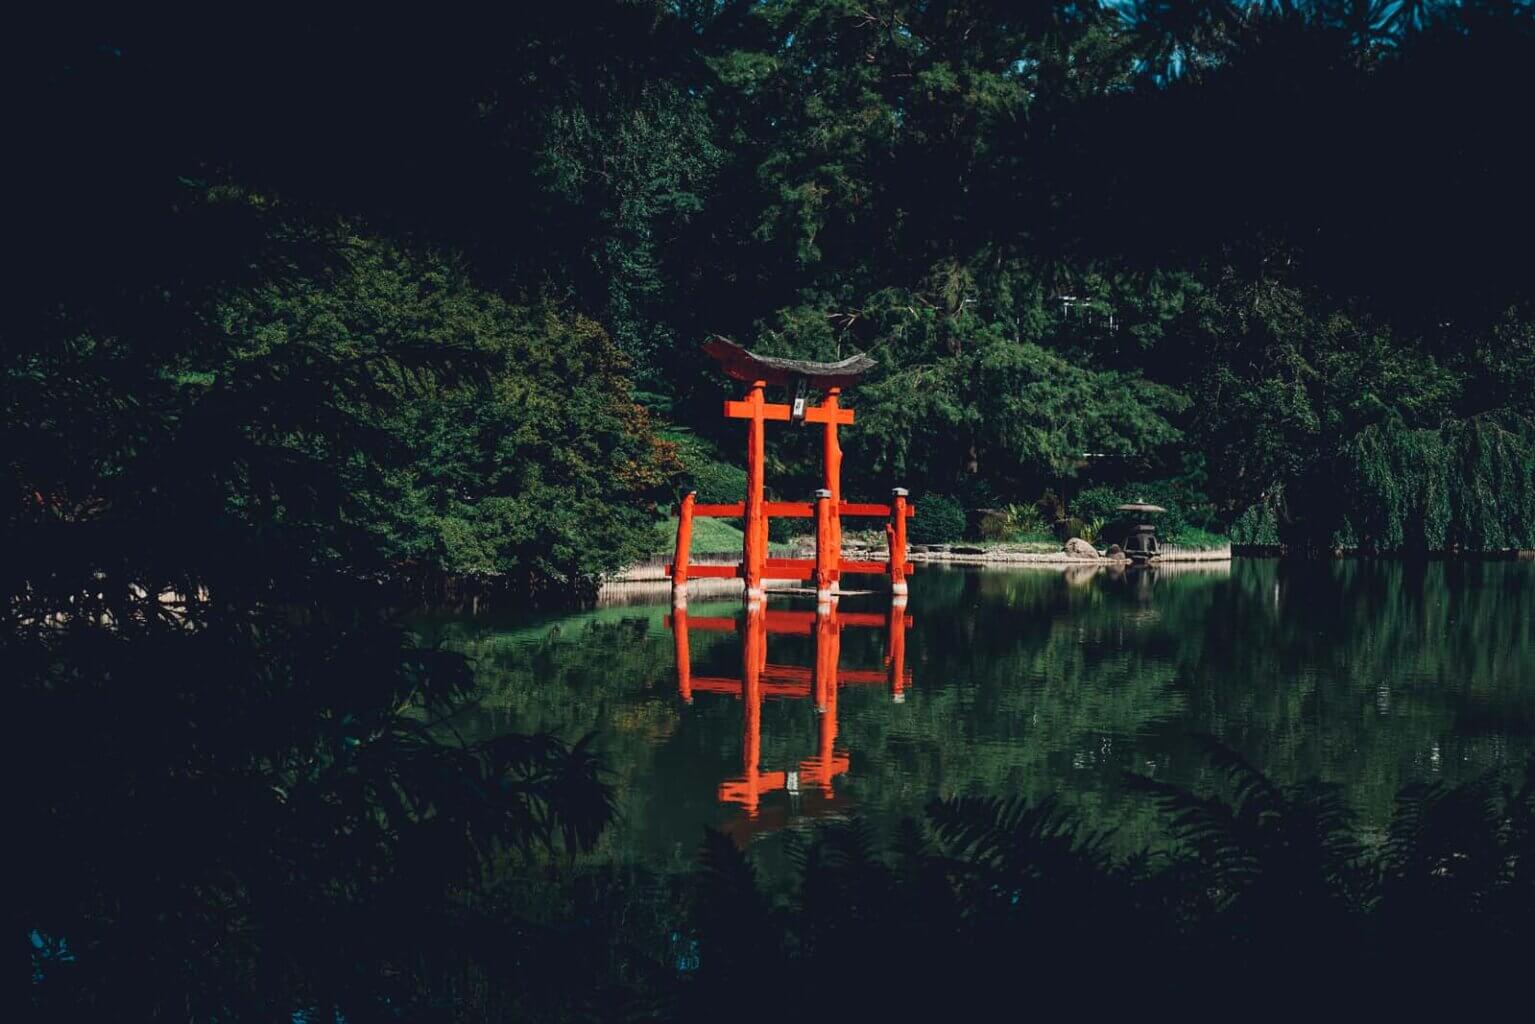 Torii Gate in the Japanese Hill and Pond Garden at Brooklyn Botanic Garden